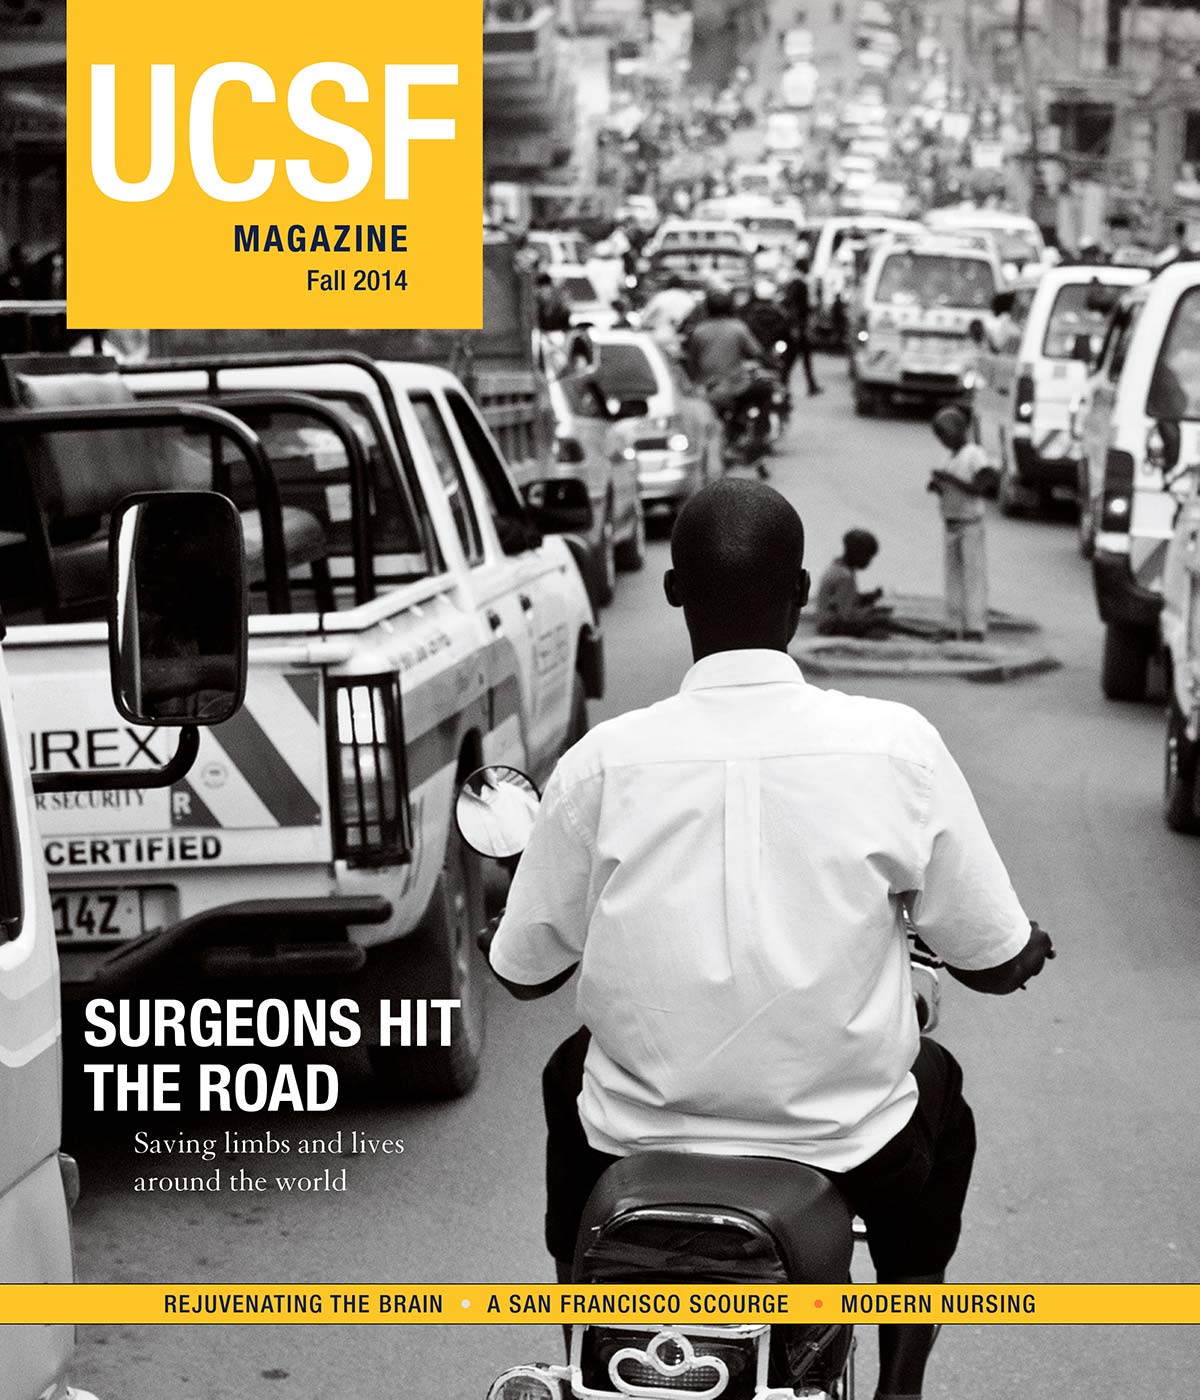 Cover of UCSF Magazine: left corner reads “UCSF Magazine, Fall 2014”. Photo of a man riding a motorbike on a busy street. Text next to photo reads: “Surgeons Hit the Road: Saving limbs and lives around the world”. Text below photo reads: “Rejuvenating the Brain; A San Francisco Scourge; Modern Nursing”